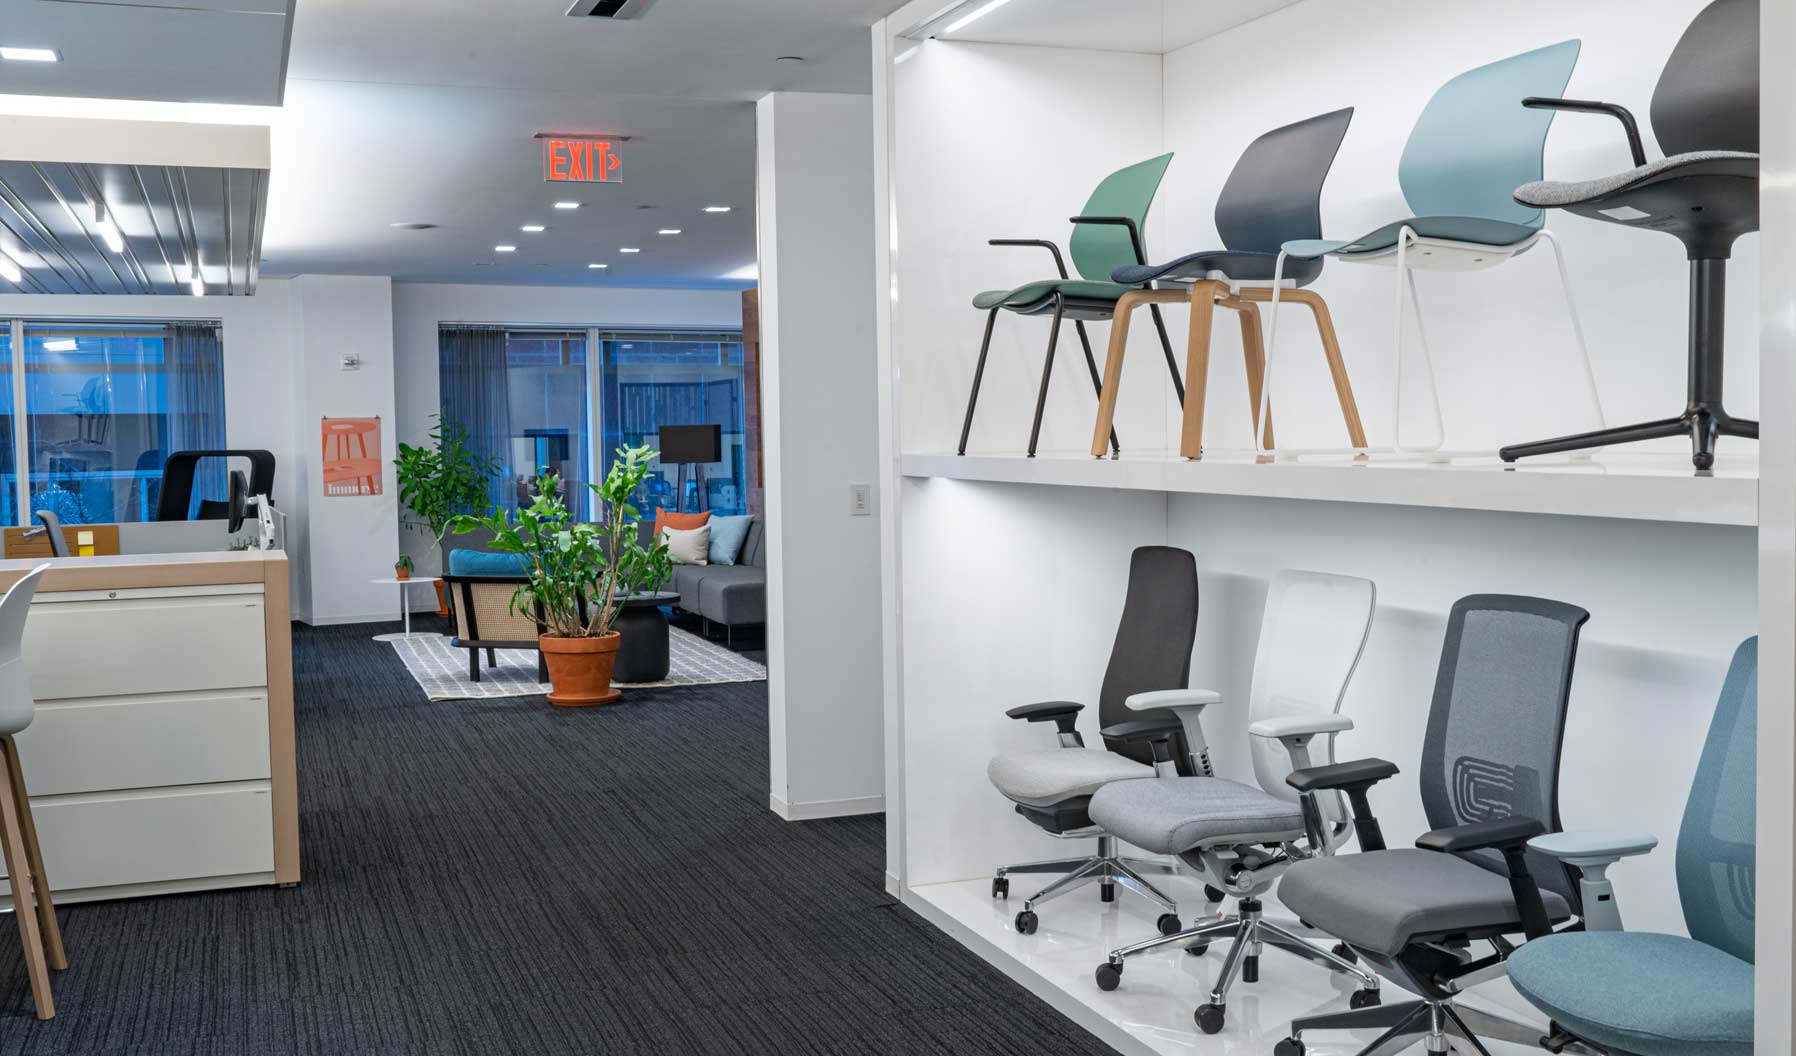 With over three decades of knowledge, science-based research, and ergonomic expertise, we understand sitting and how to support people at work. Our chairs are designed with you in mind. Each one—in its own form—engineered to provide the comfort you need to focus and get into the flow.